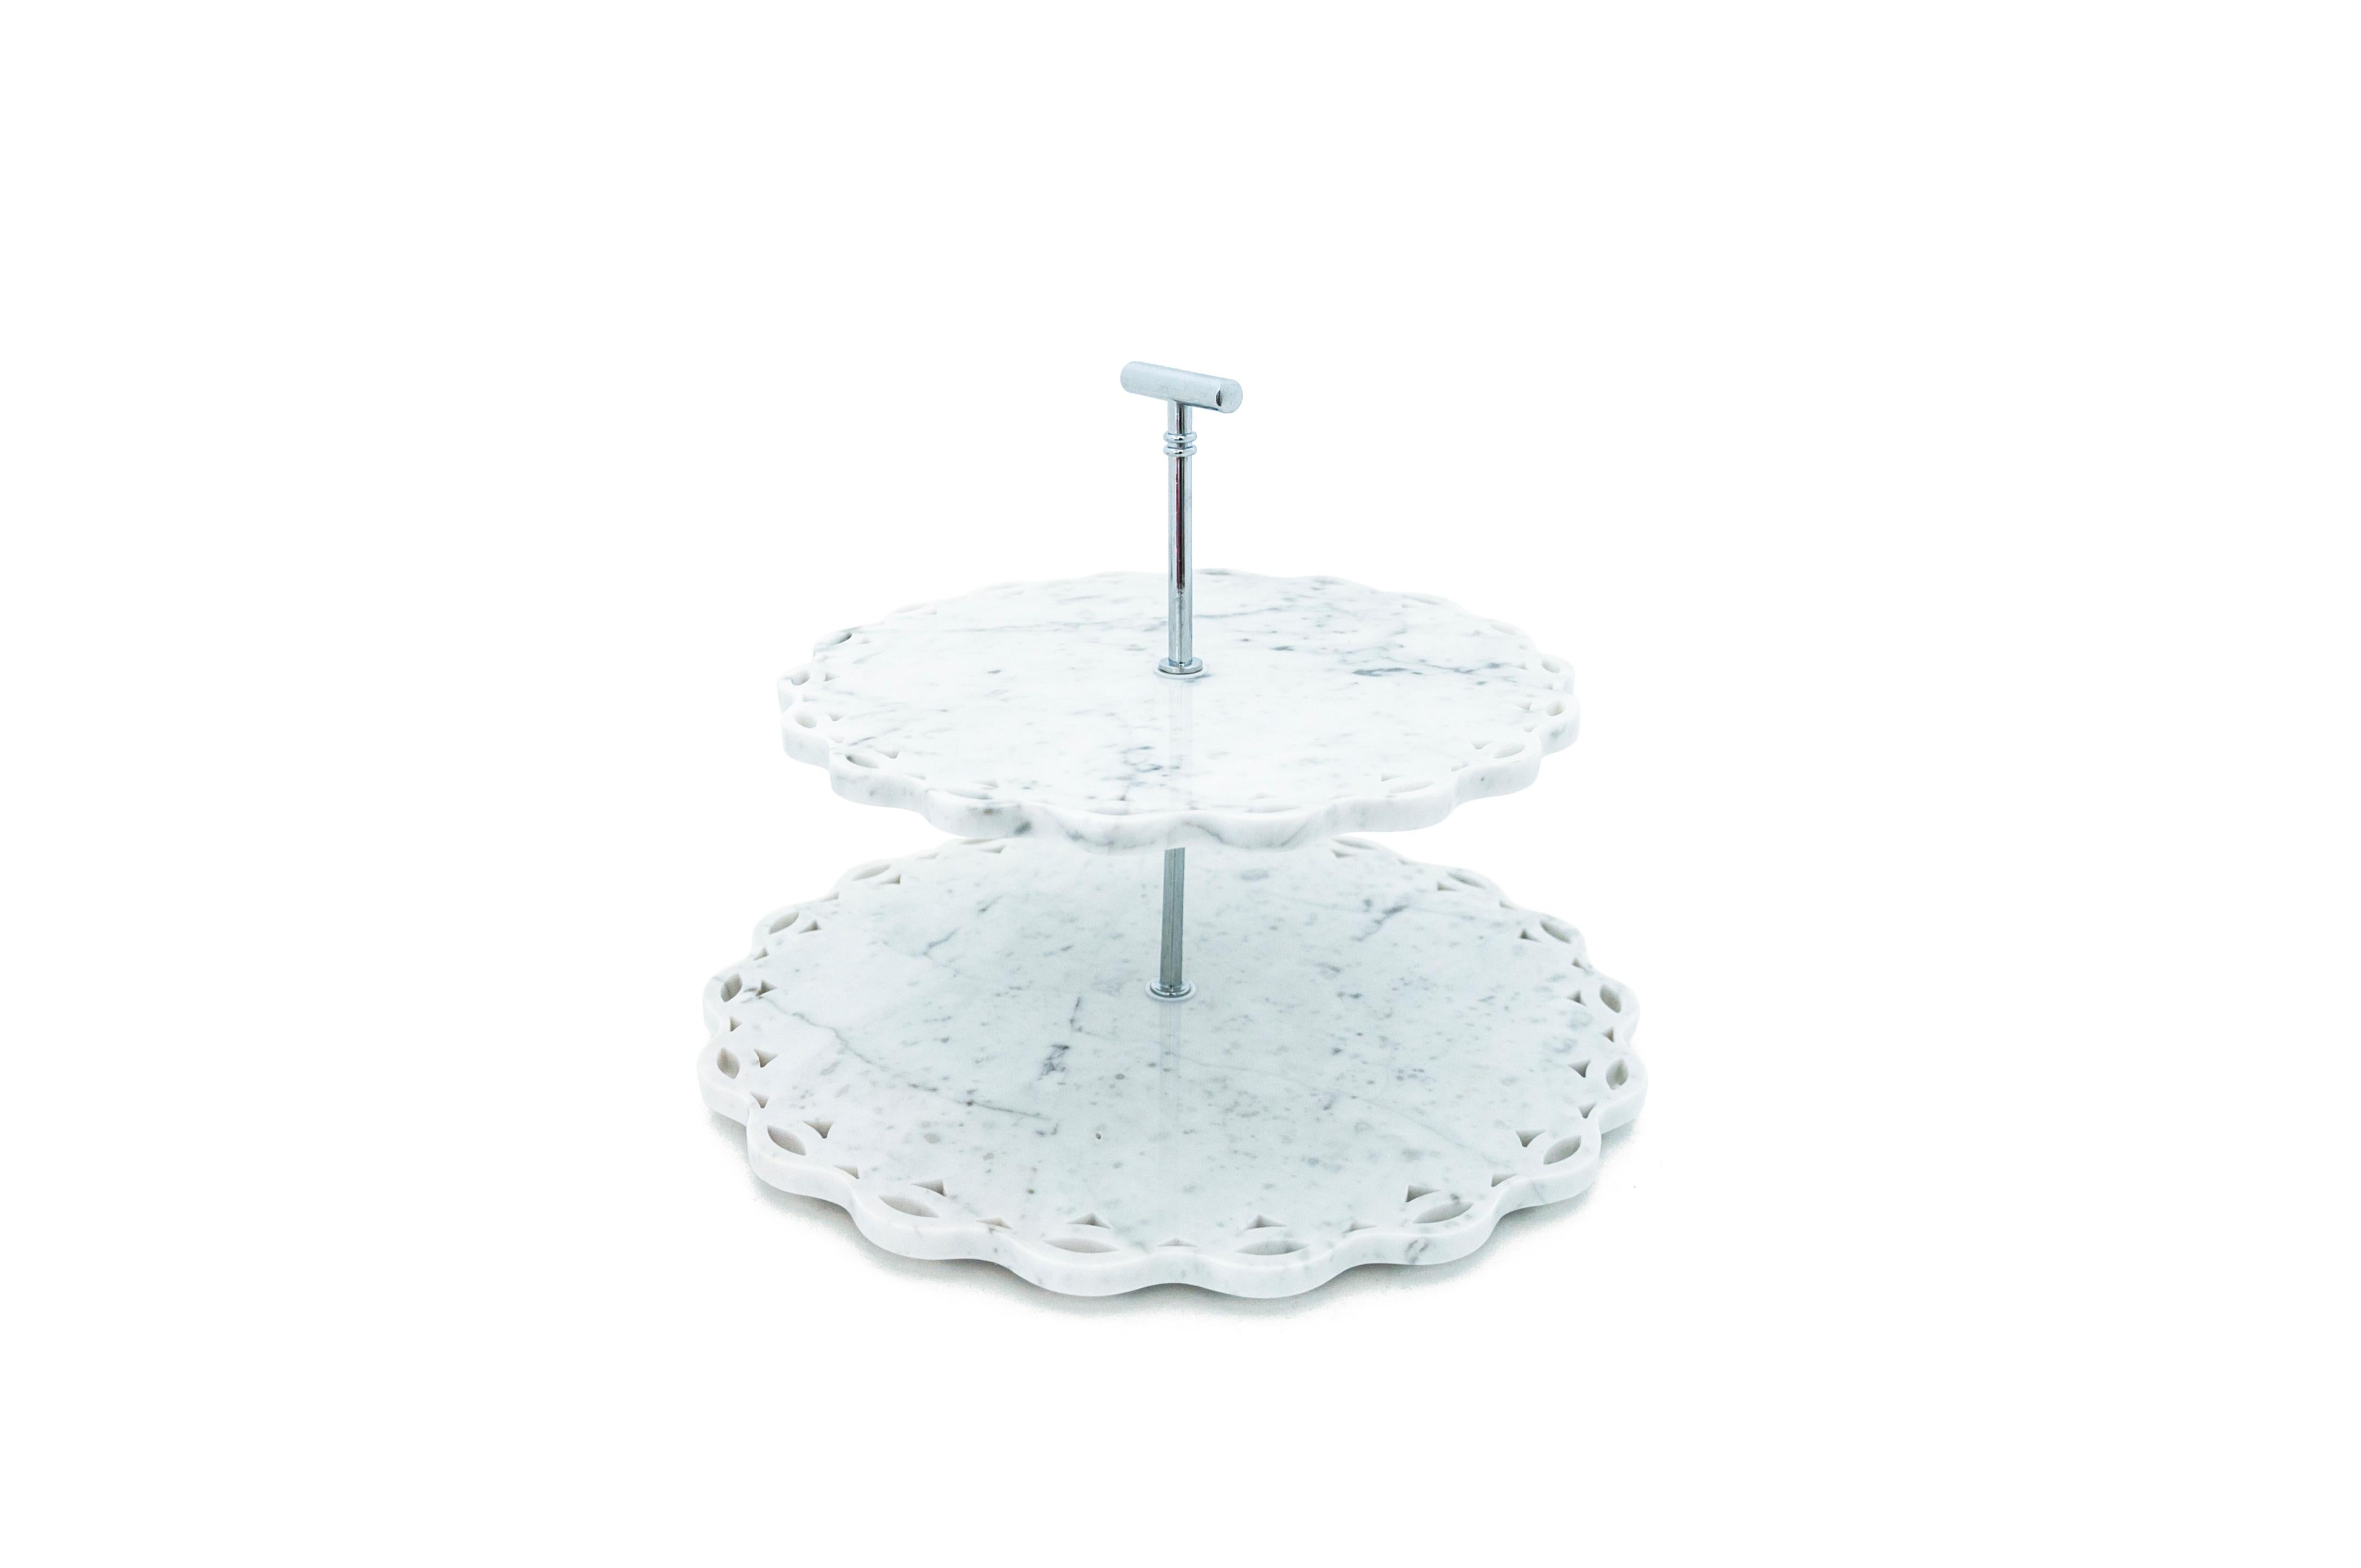 Hand-Crafted Marble Stand Cake with Lace Edge in White Carrara Marble